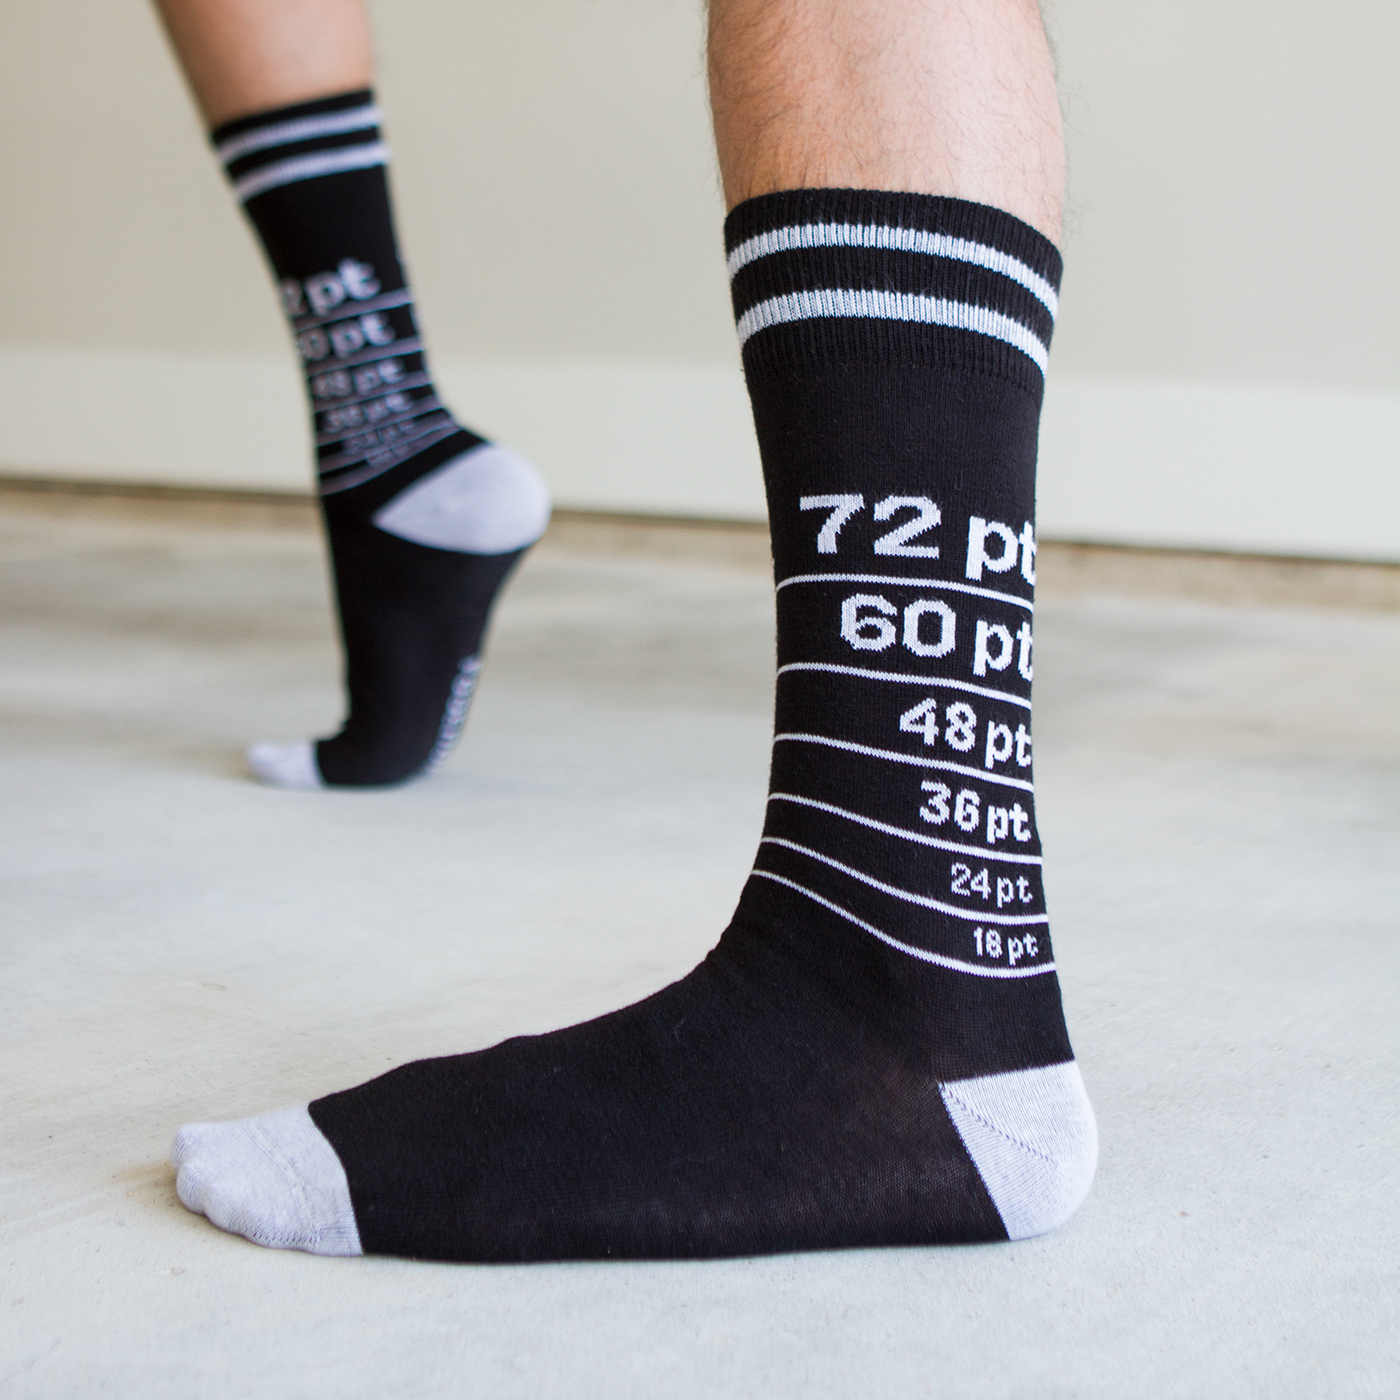 socks type knit graphic design  typography   Typeface type design letters footnotes point size